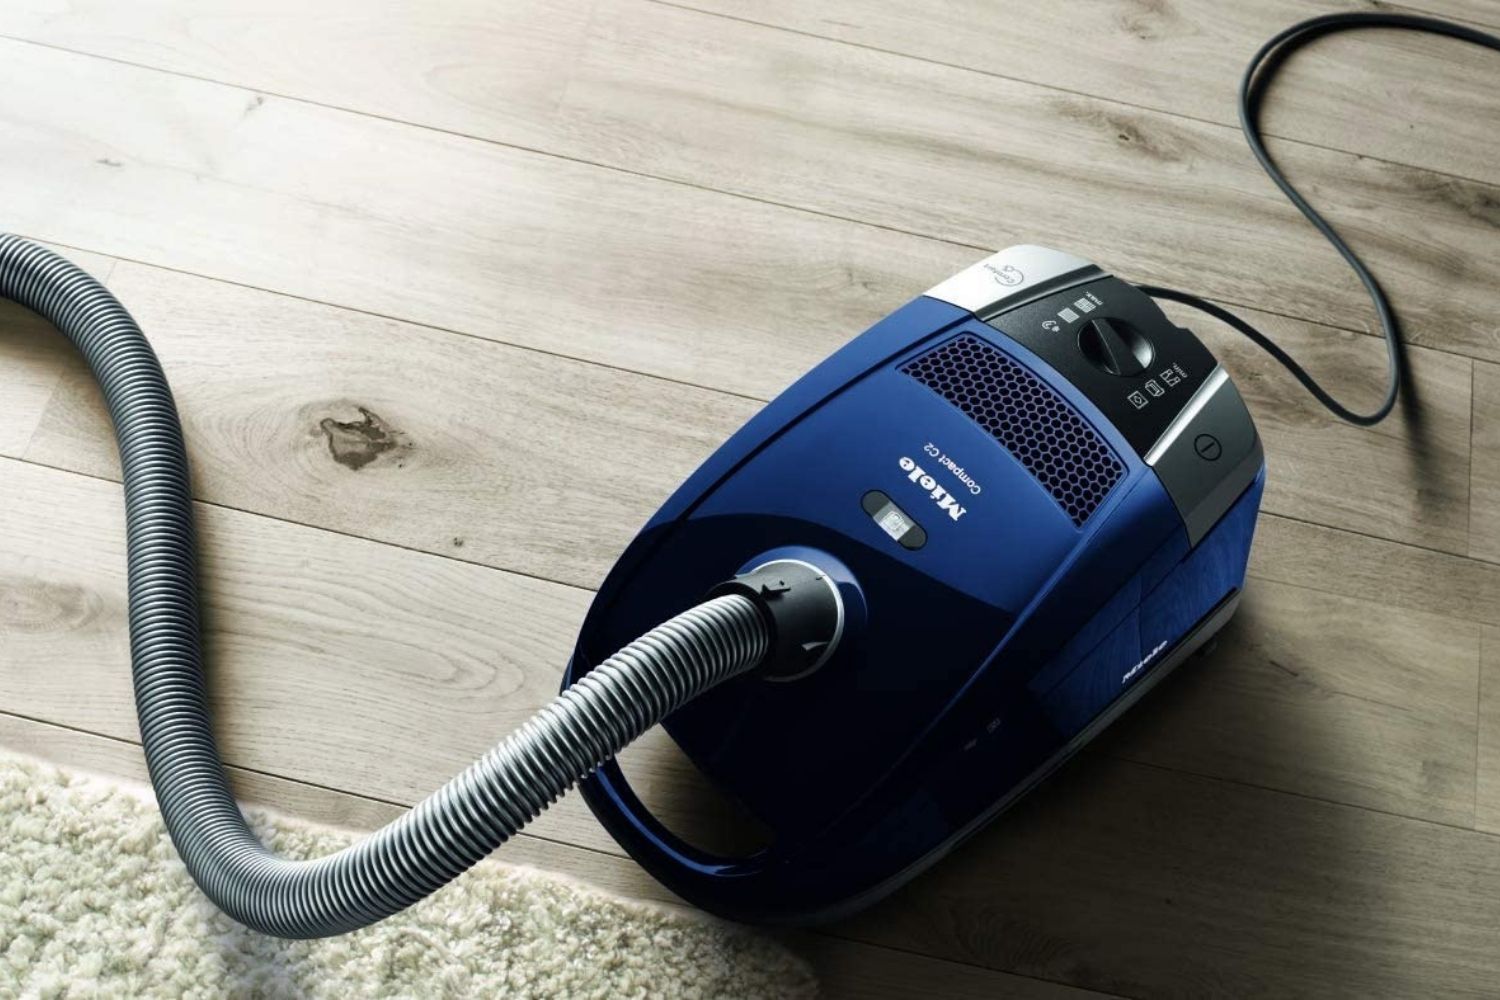 The best vacuum for thick carpets sits on a wood floor next to a carpeted floor